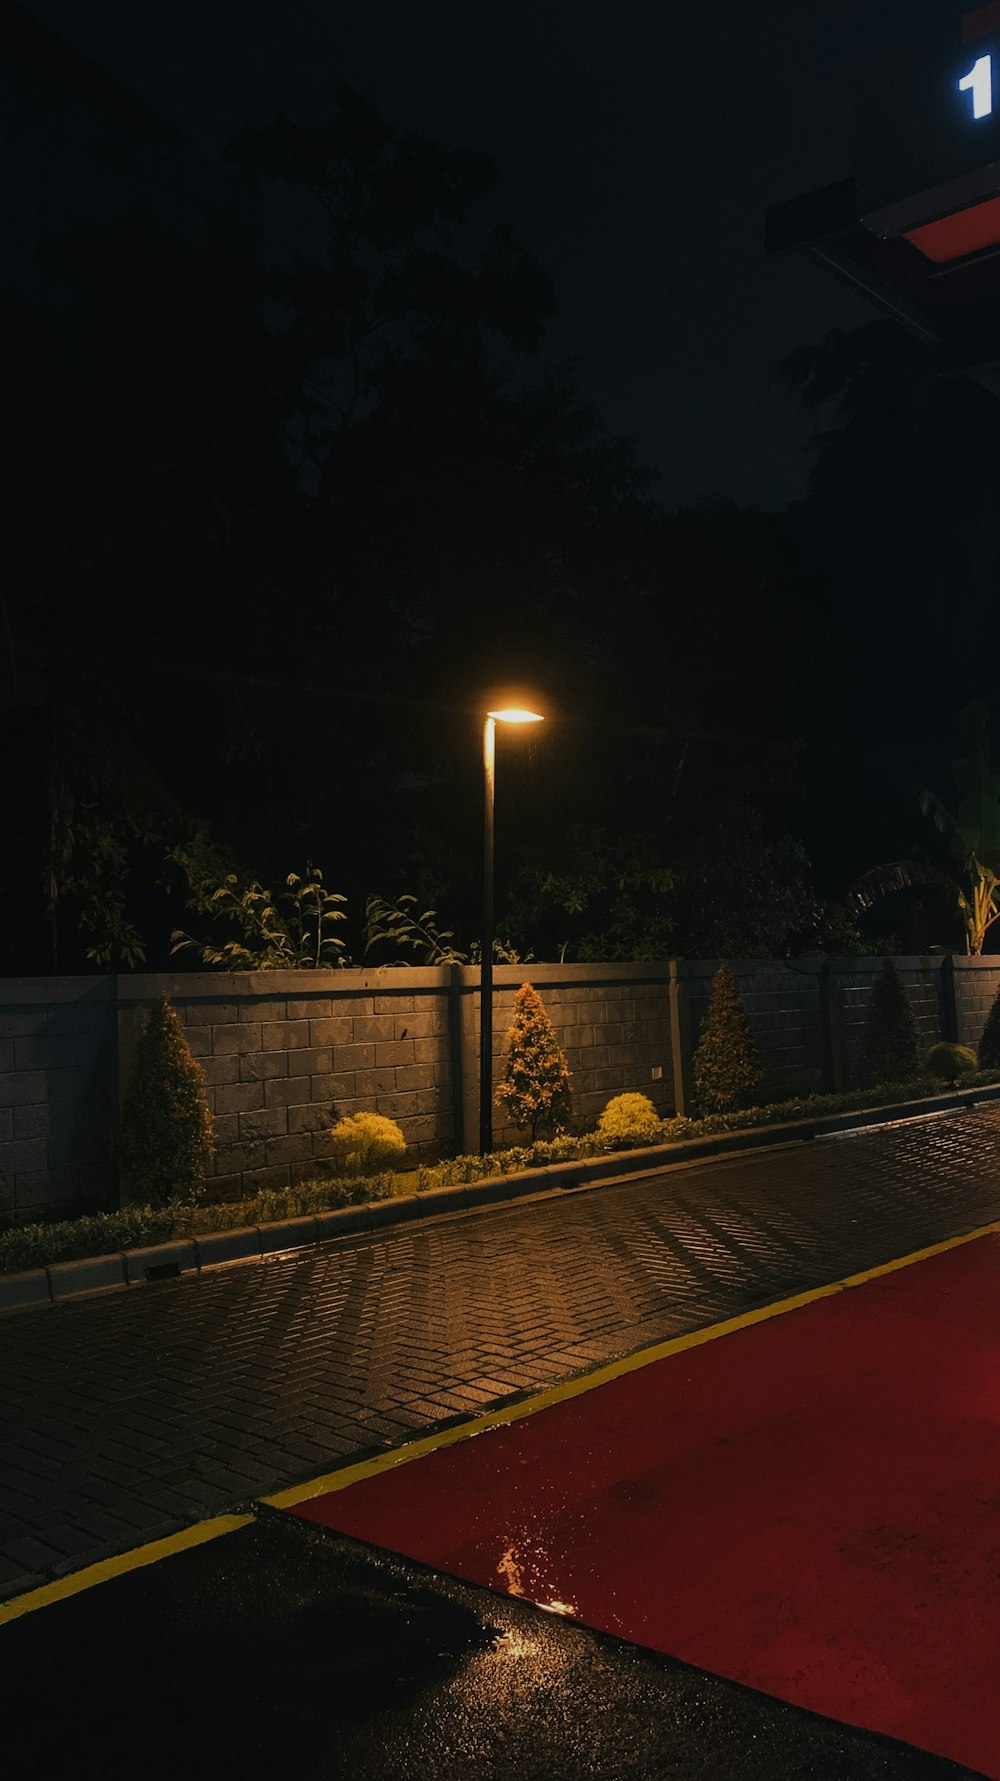 a red carpet on the side of a road at night